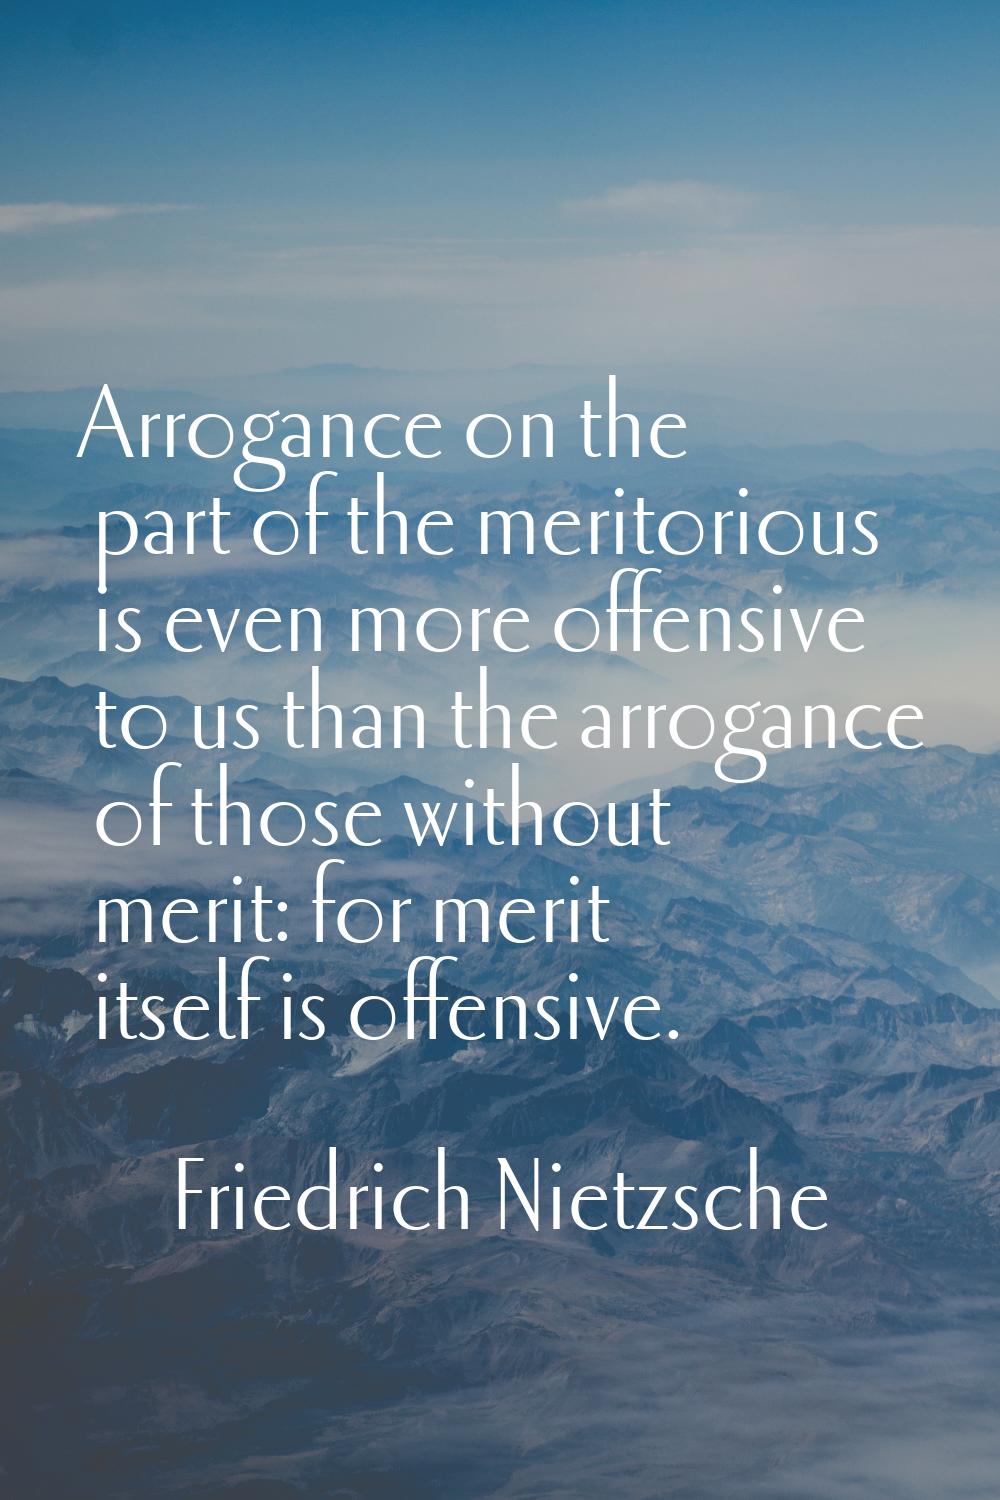 Arrogance on the part of the meritorious is even more offensive to us than the arrogance of those w